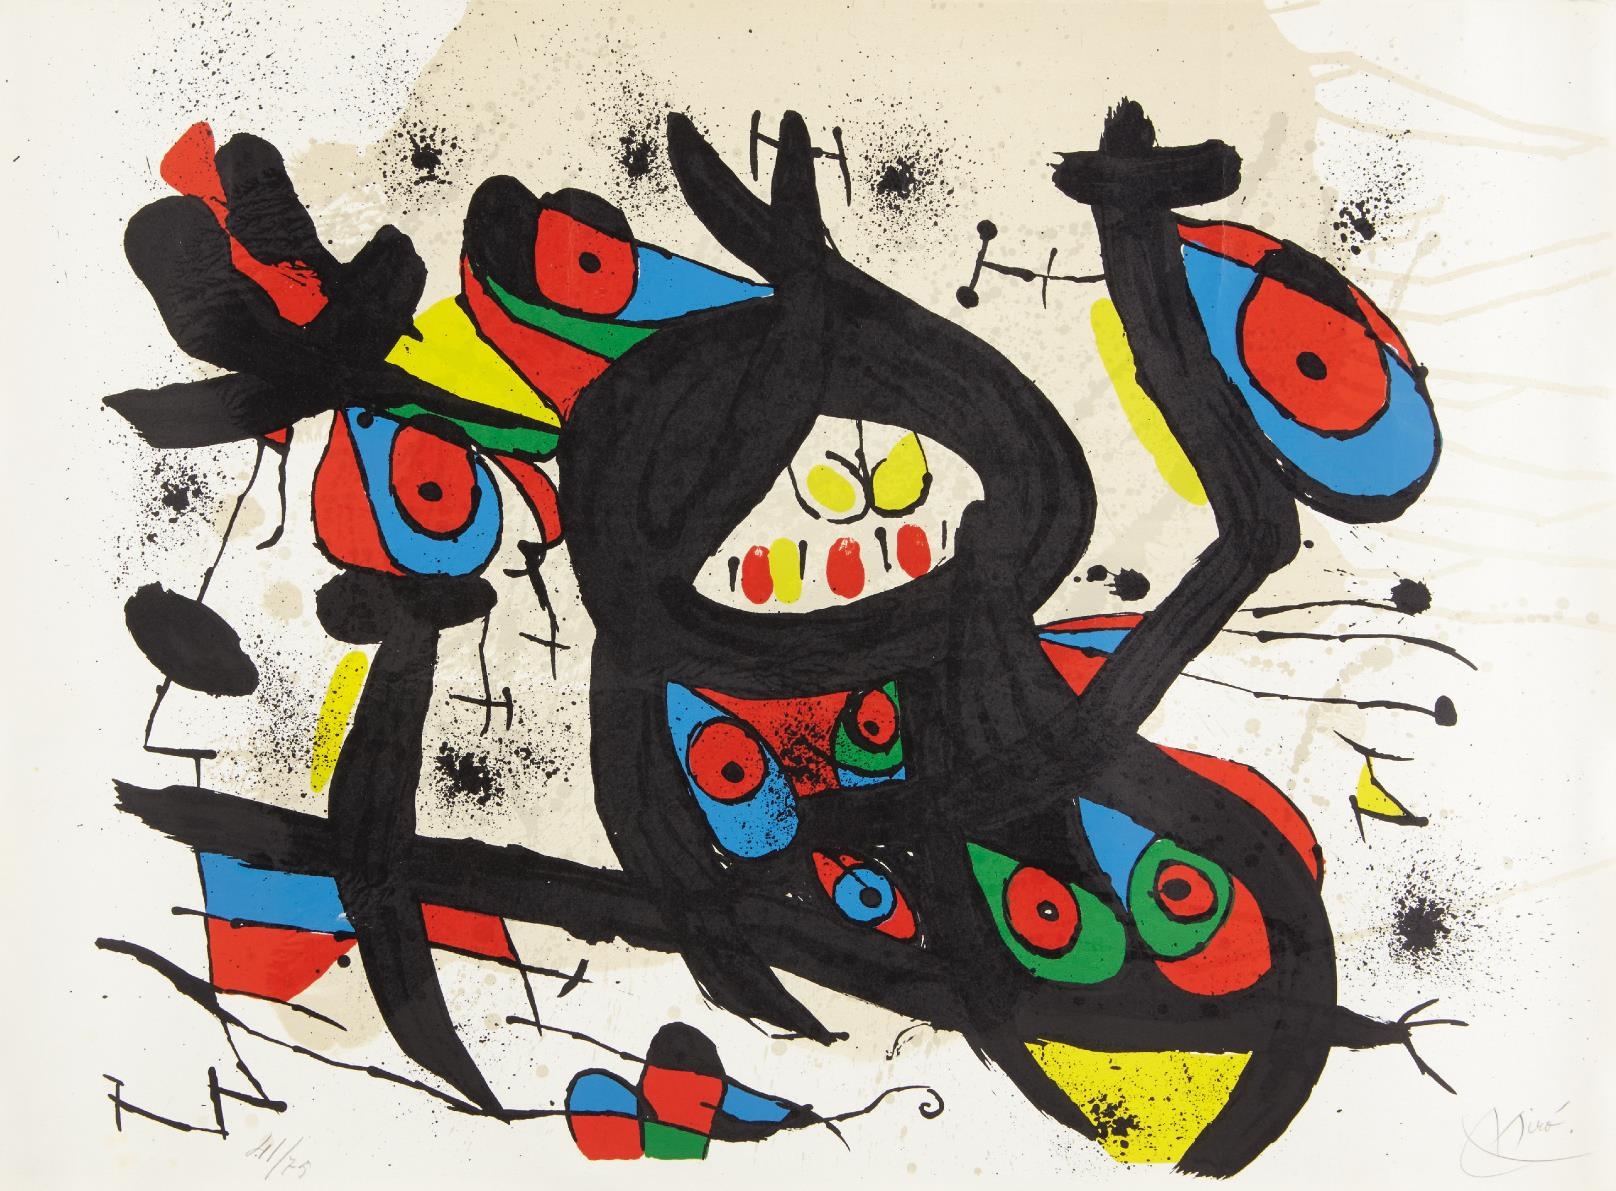 Lithograph for the exhibition Miró at Casino of Knokke-le-Zoute by Joan Miró, 1971